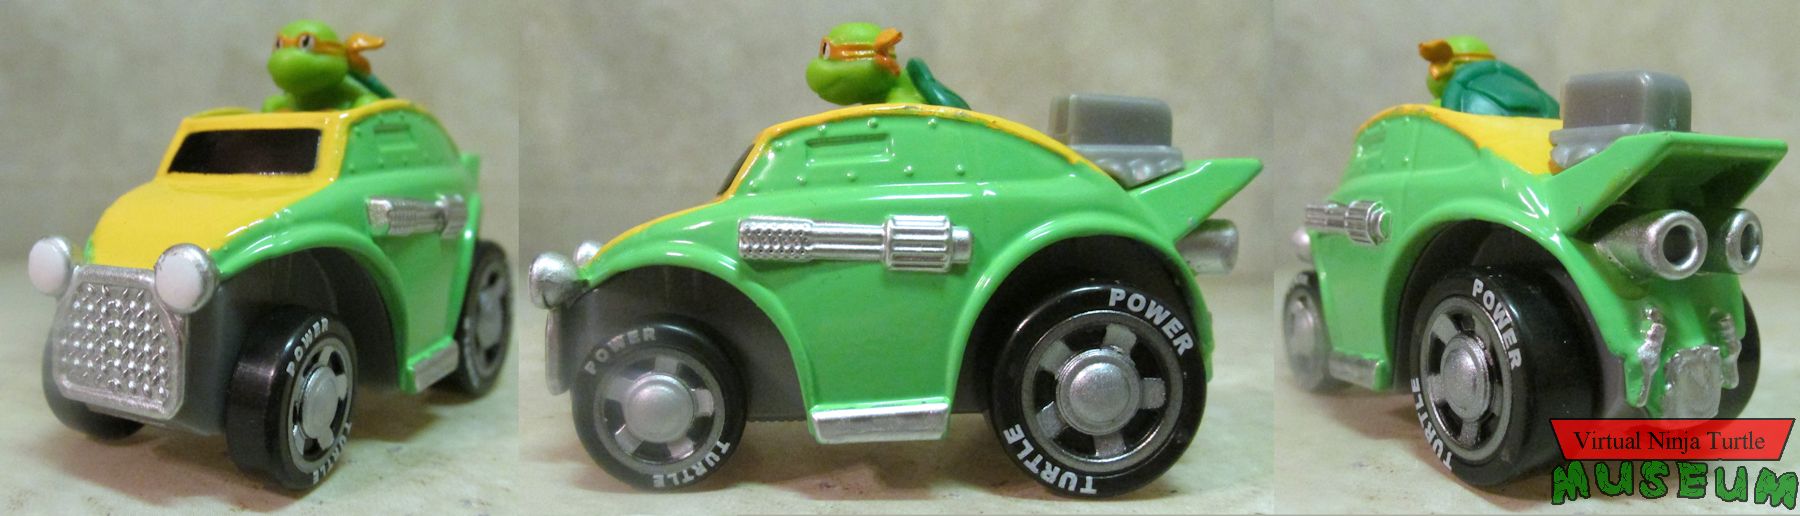 Shell Riders Michelangelo front, side and rear